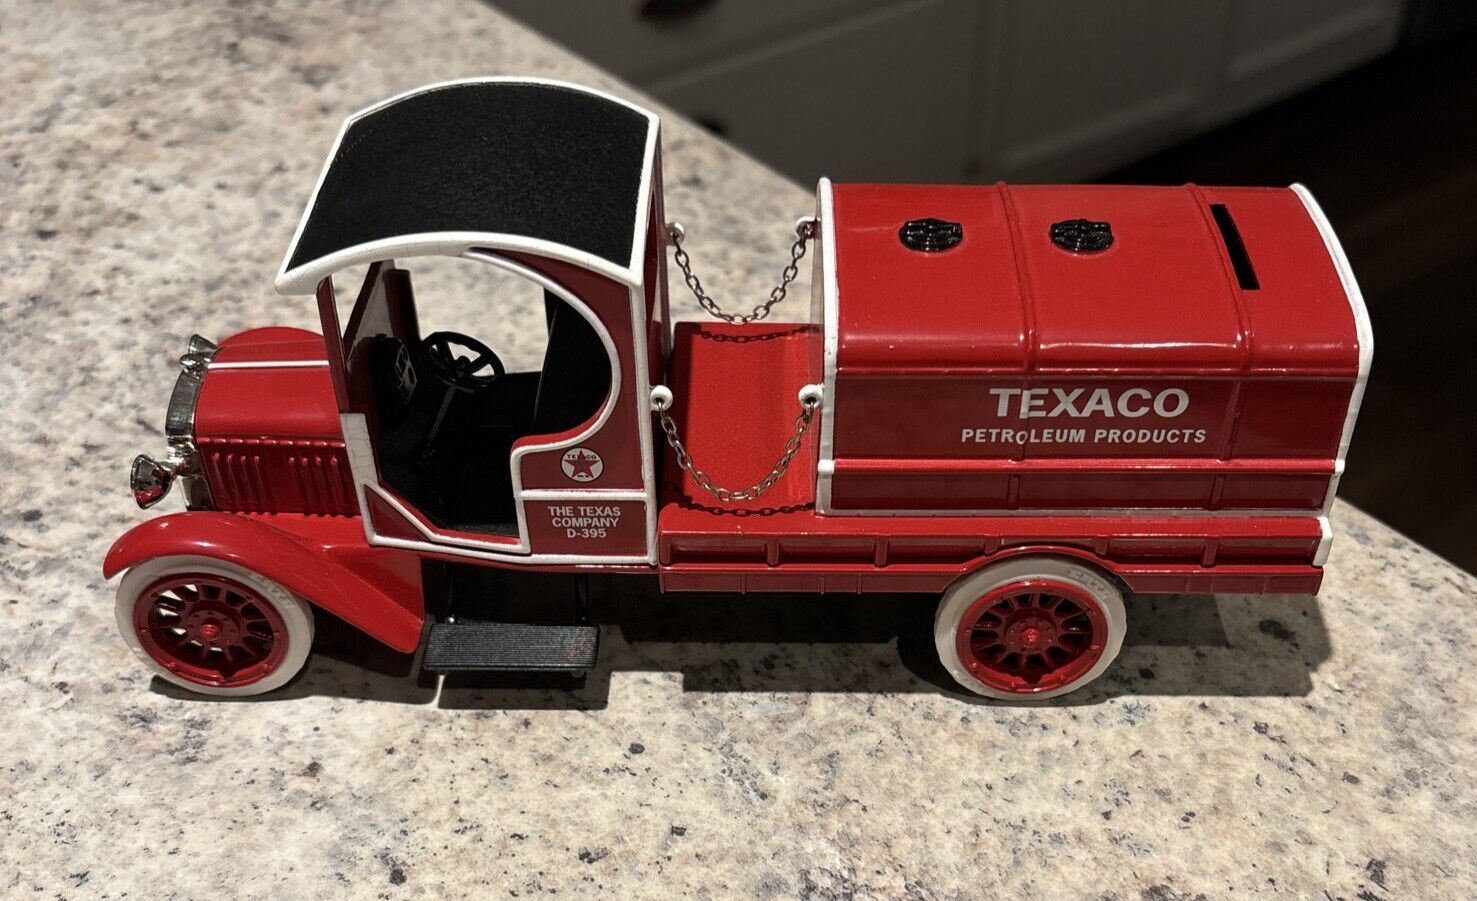 Texaco Petroleum Products Red Tanker Trunk D-395 ERTL Collectibles Die Cast 